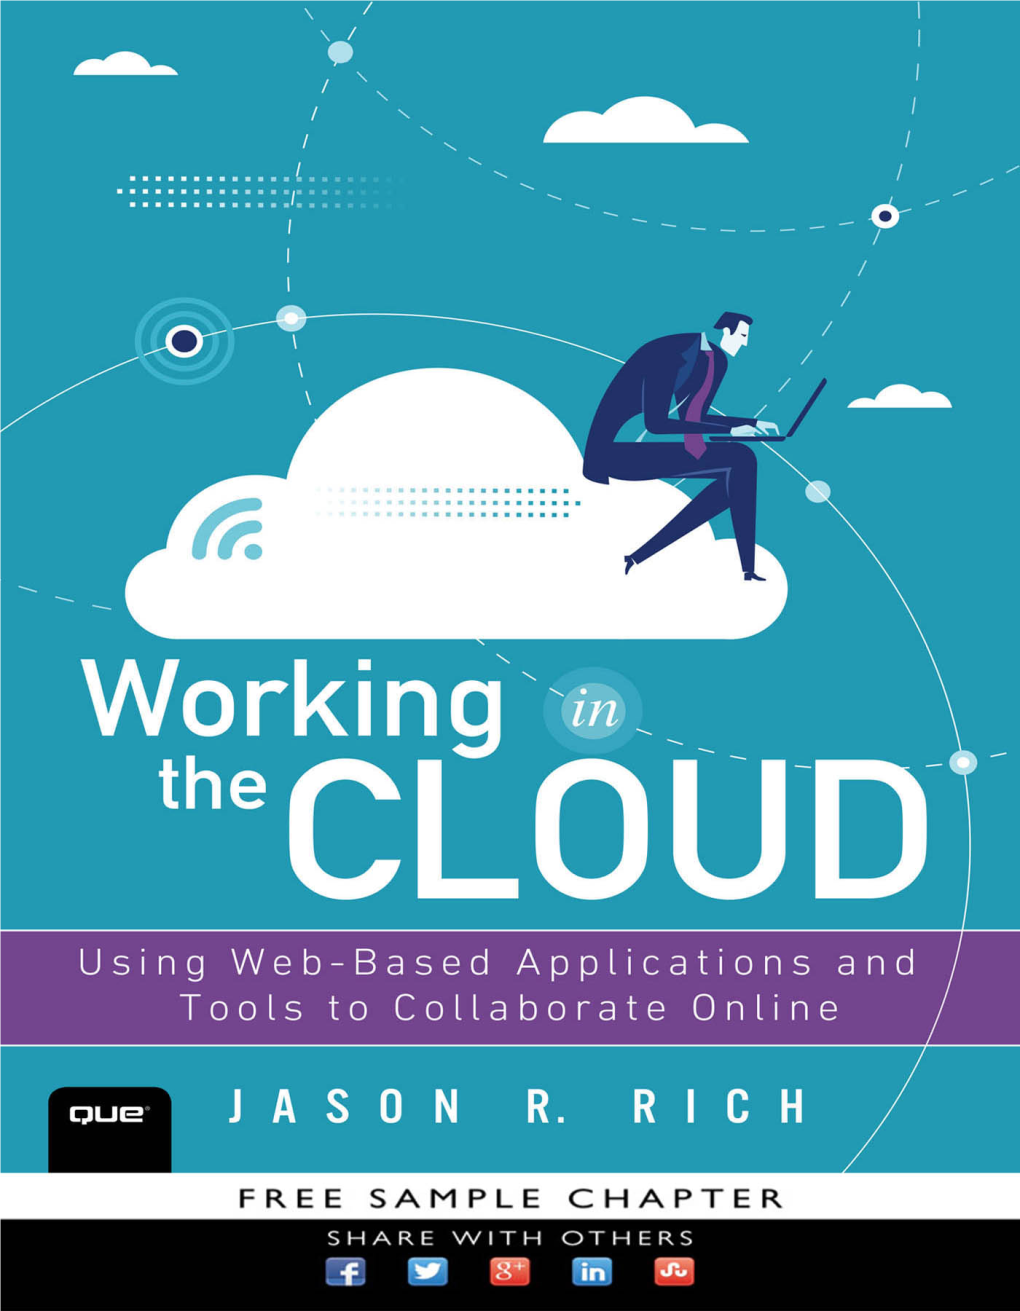 Working in the Cloud Using Web-Based Applications and Tools to Collaborate Online